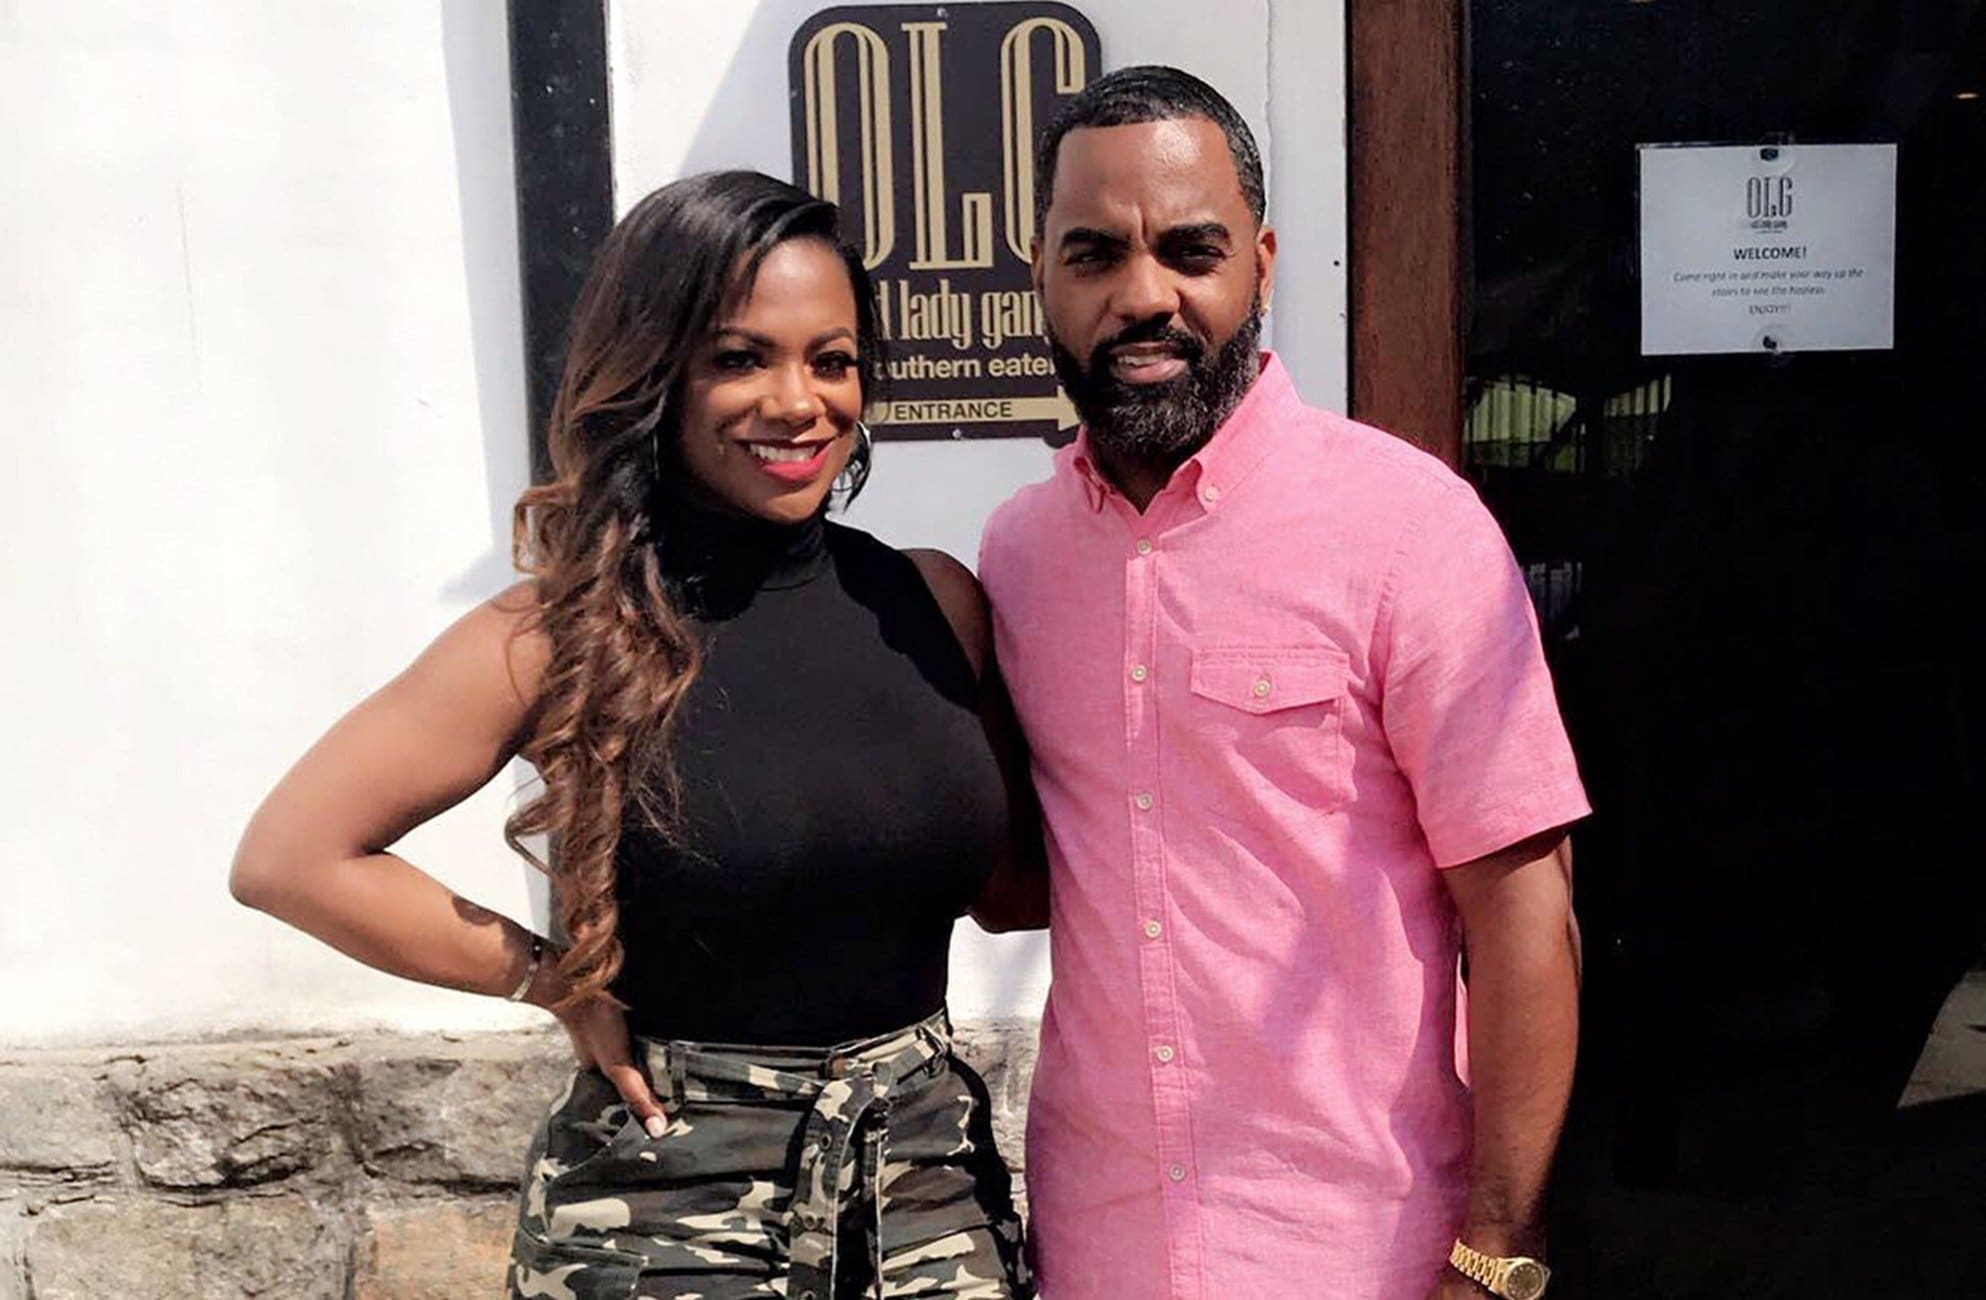 Kandi Burruss Shares A Video From Her Rehearsal And Todd Tucker Is In It As Well